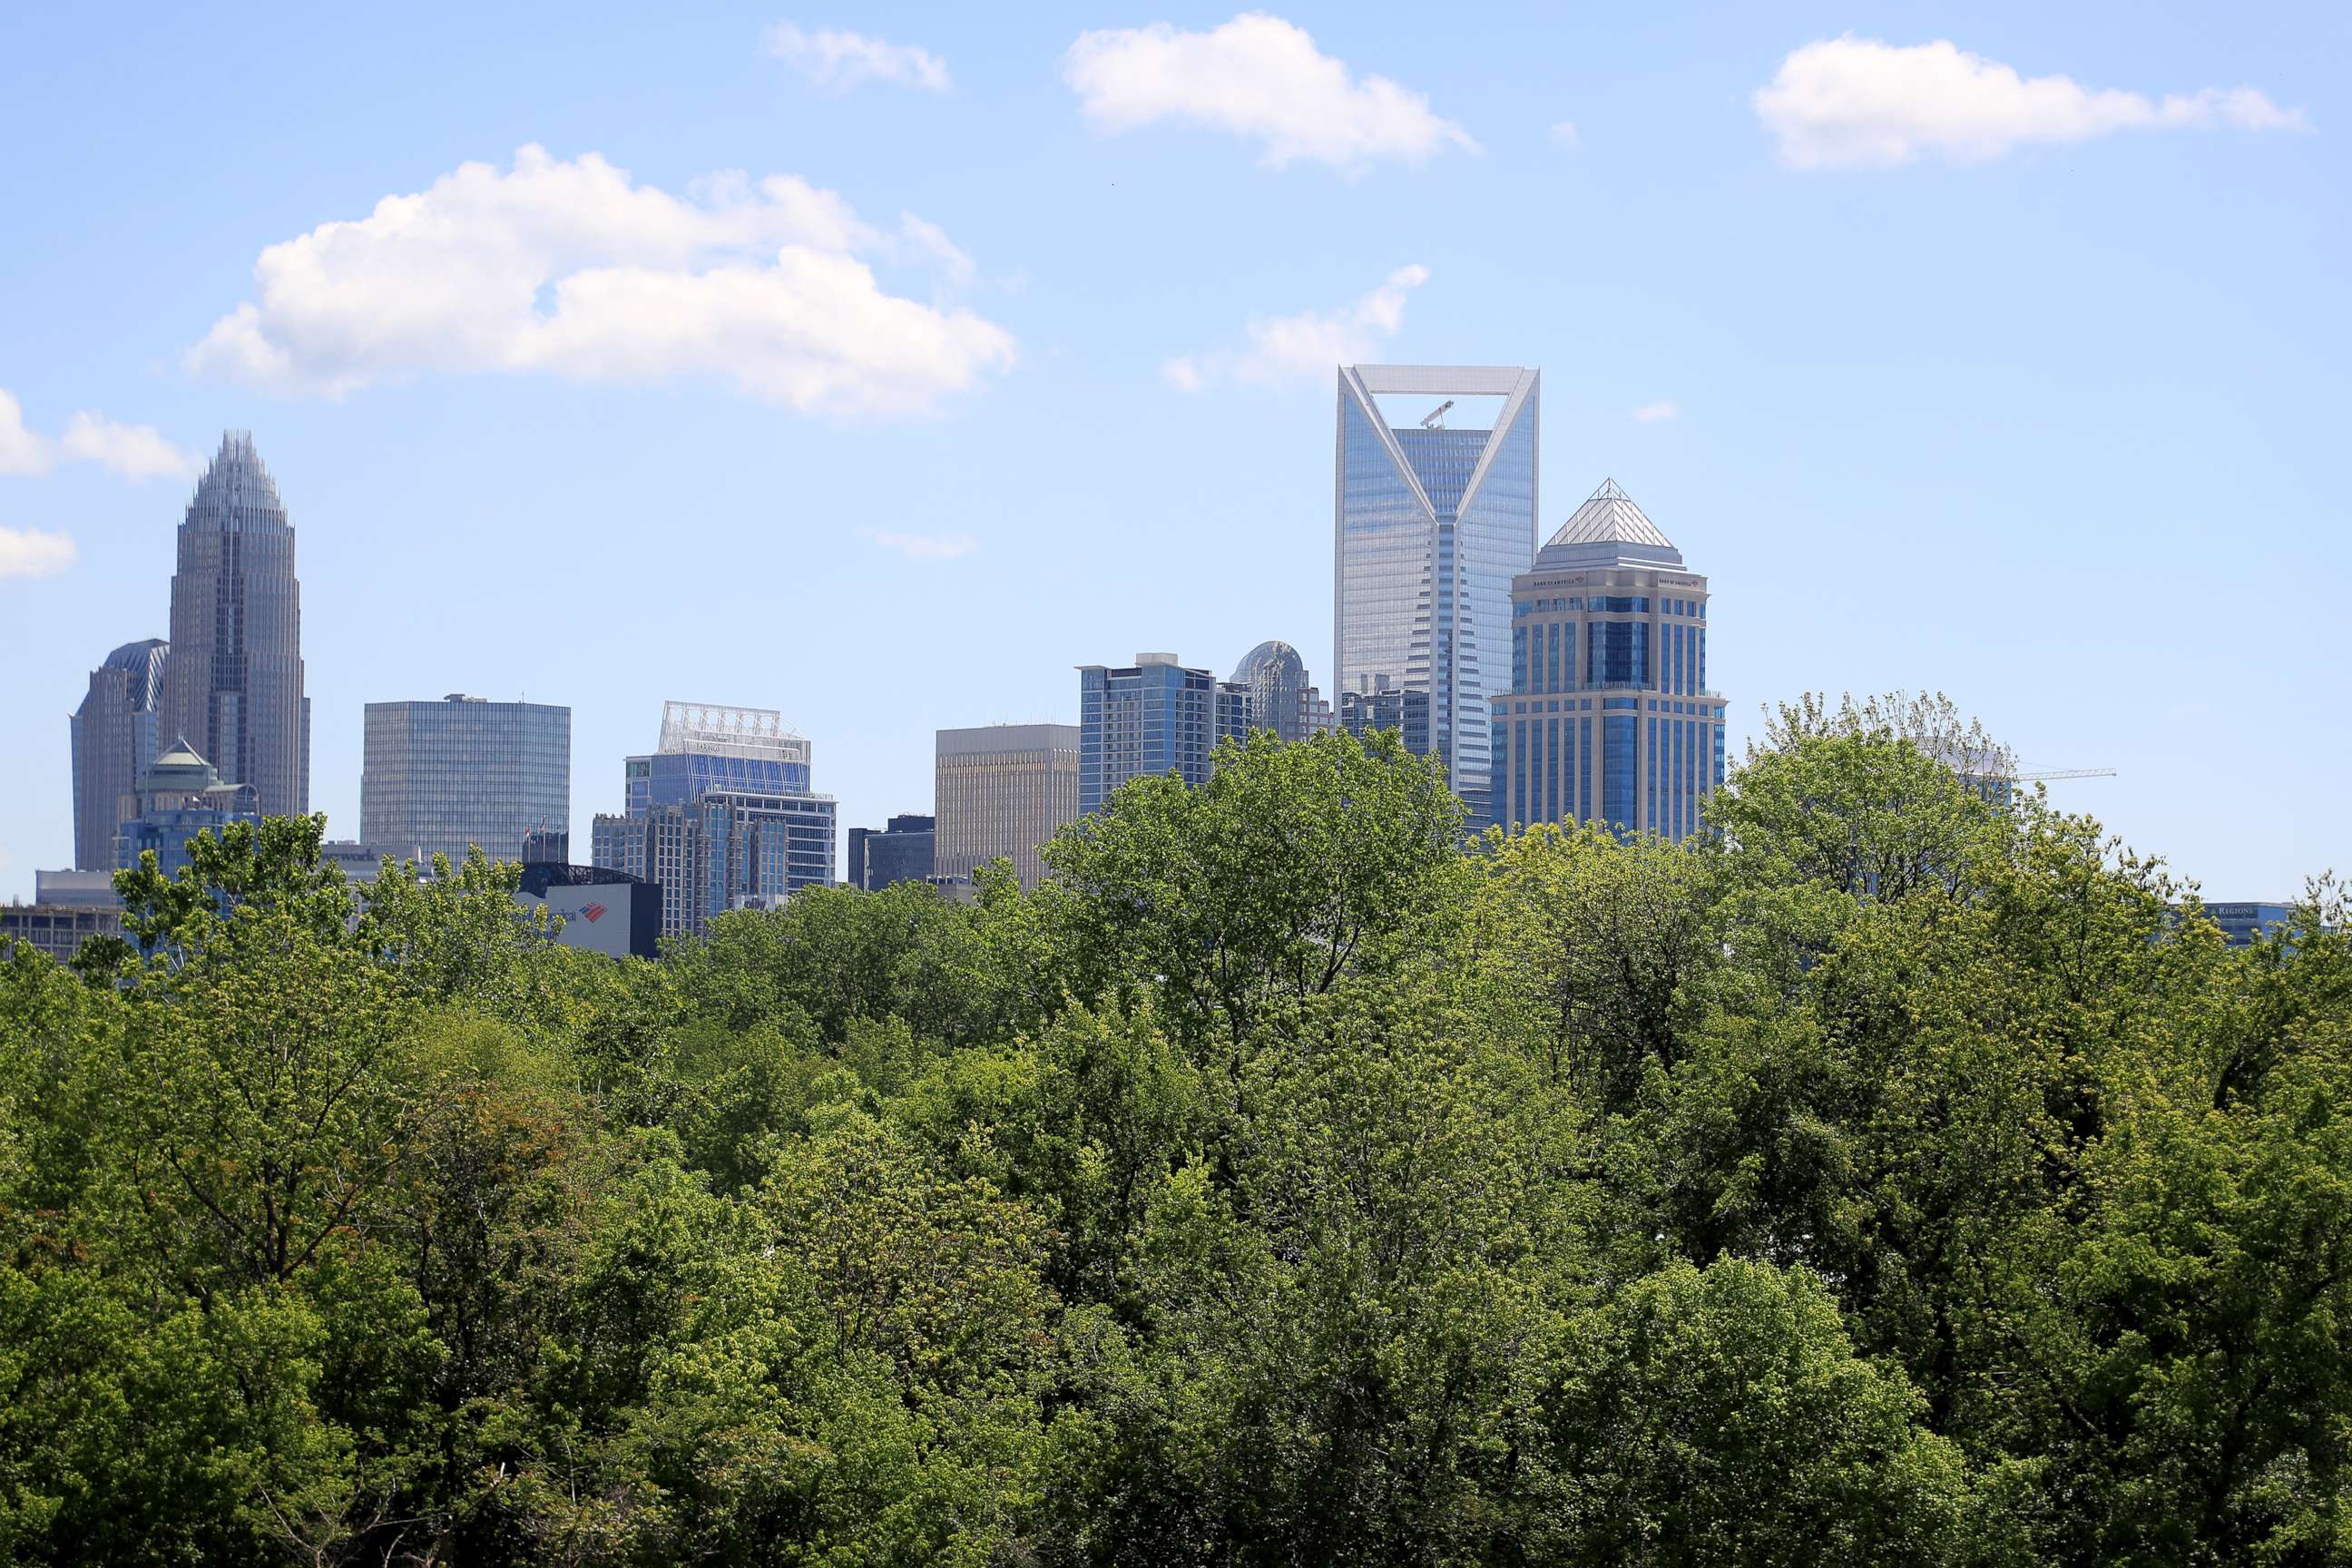 PHOTO: A general view of the Charlotte skyline on April 21, 2020, in Charlotte, N.C.